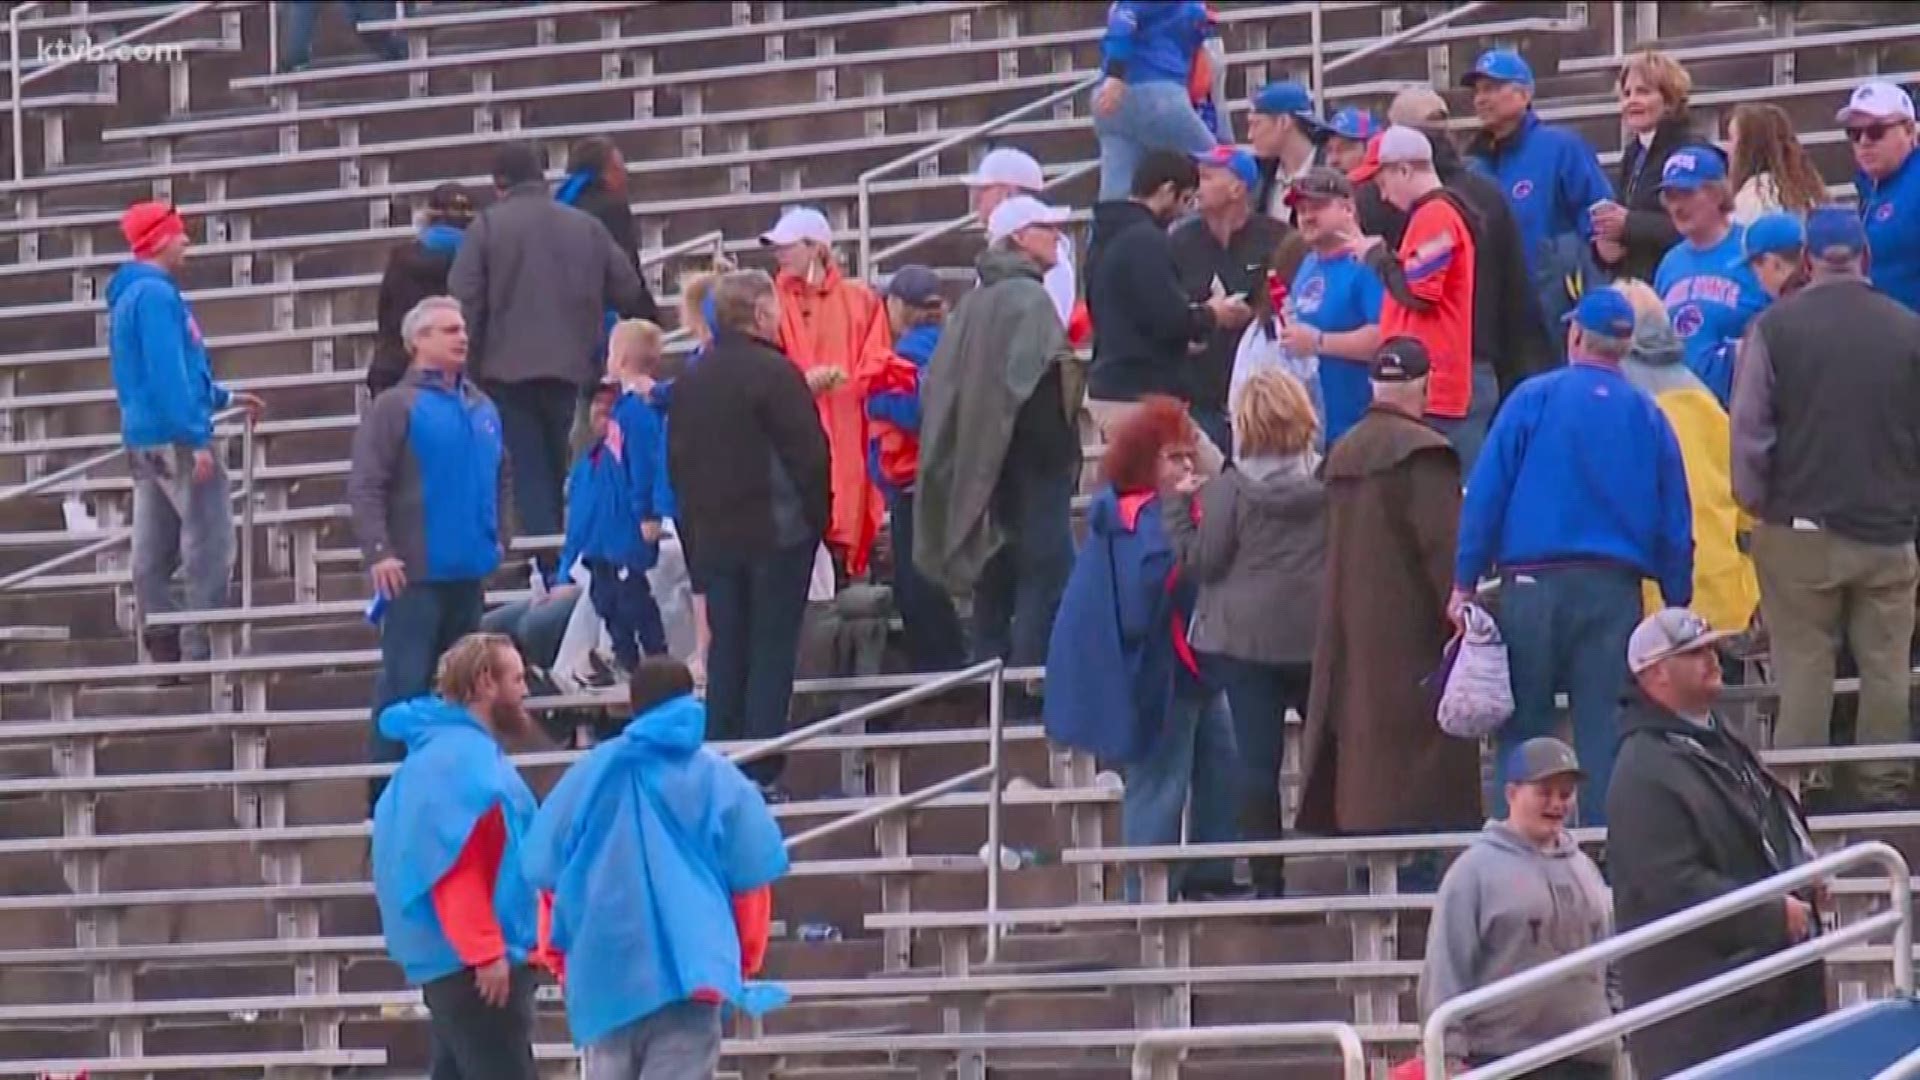 The SERVPRO First Responder Bowl between Boise State and Boston College was canceled due to severe weather.